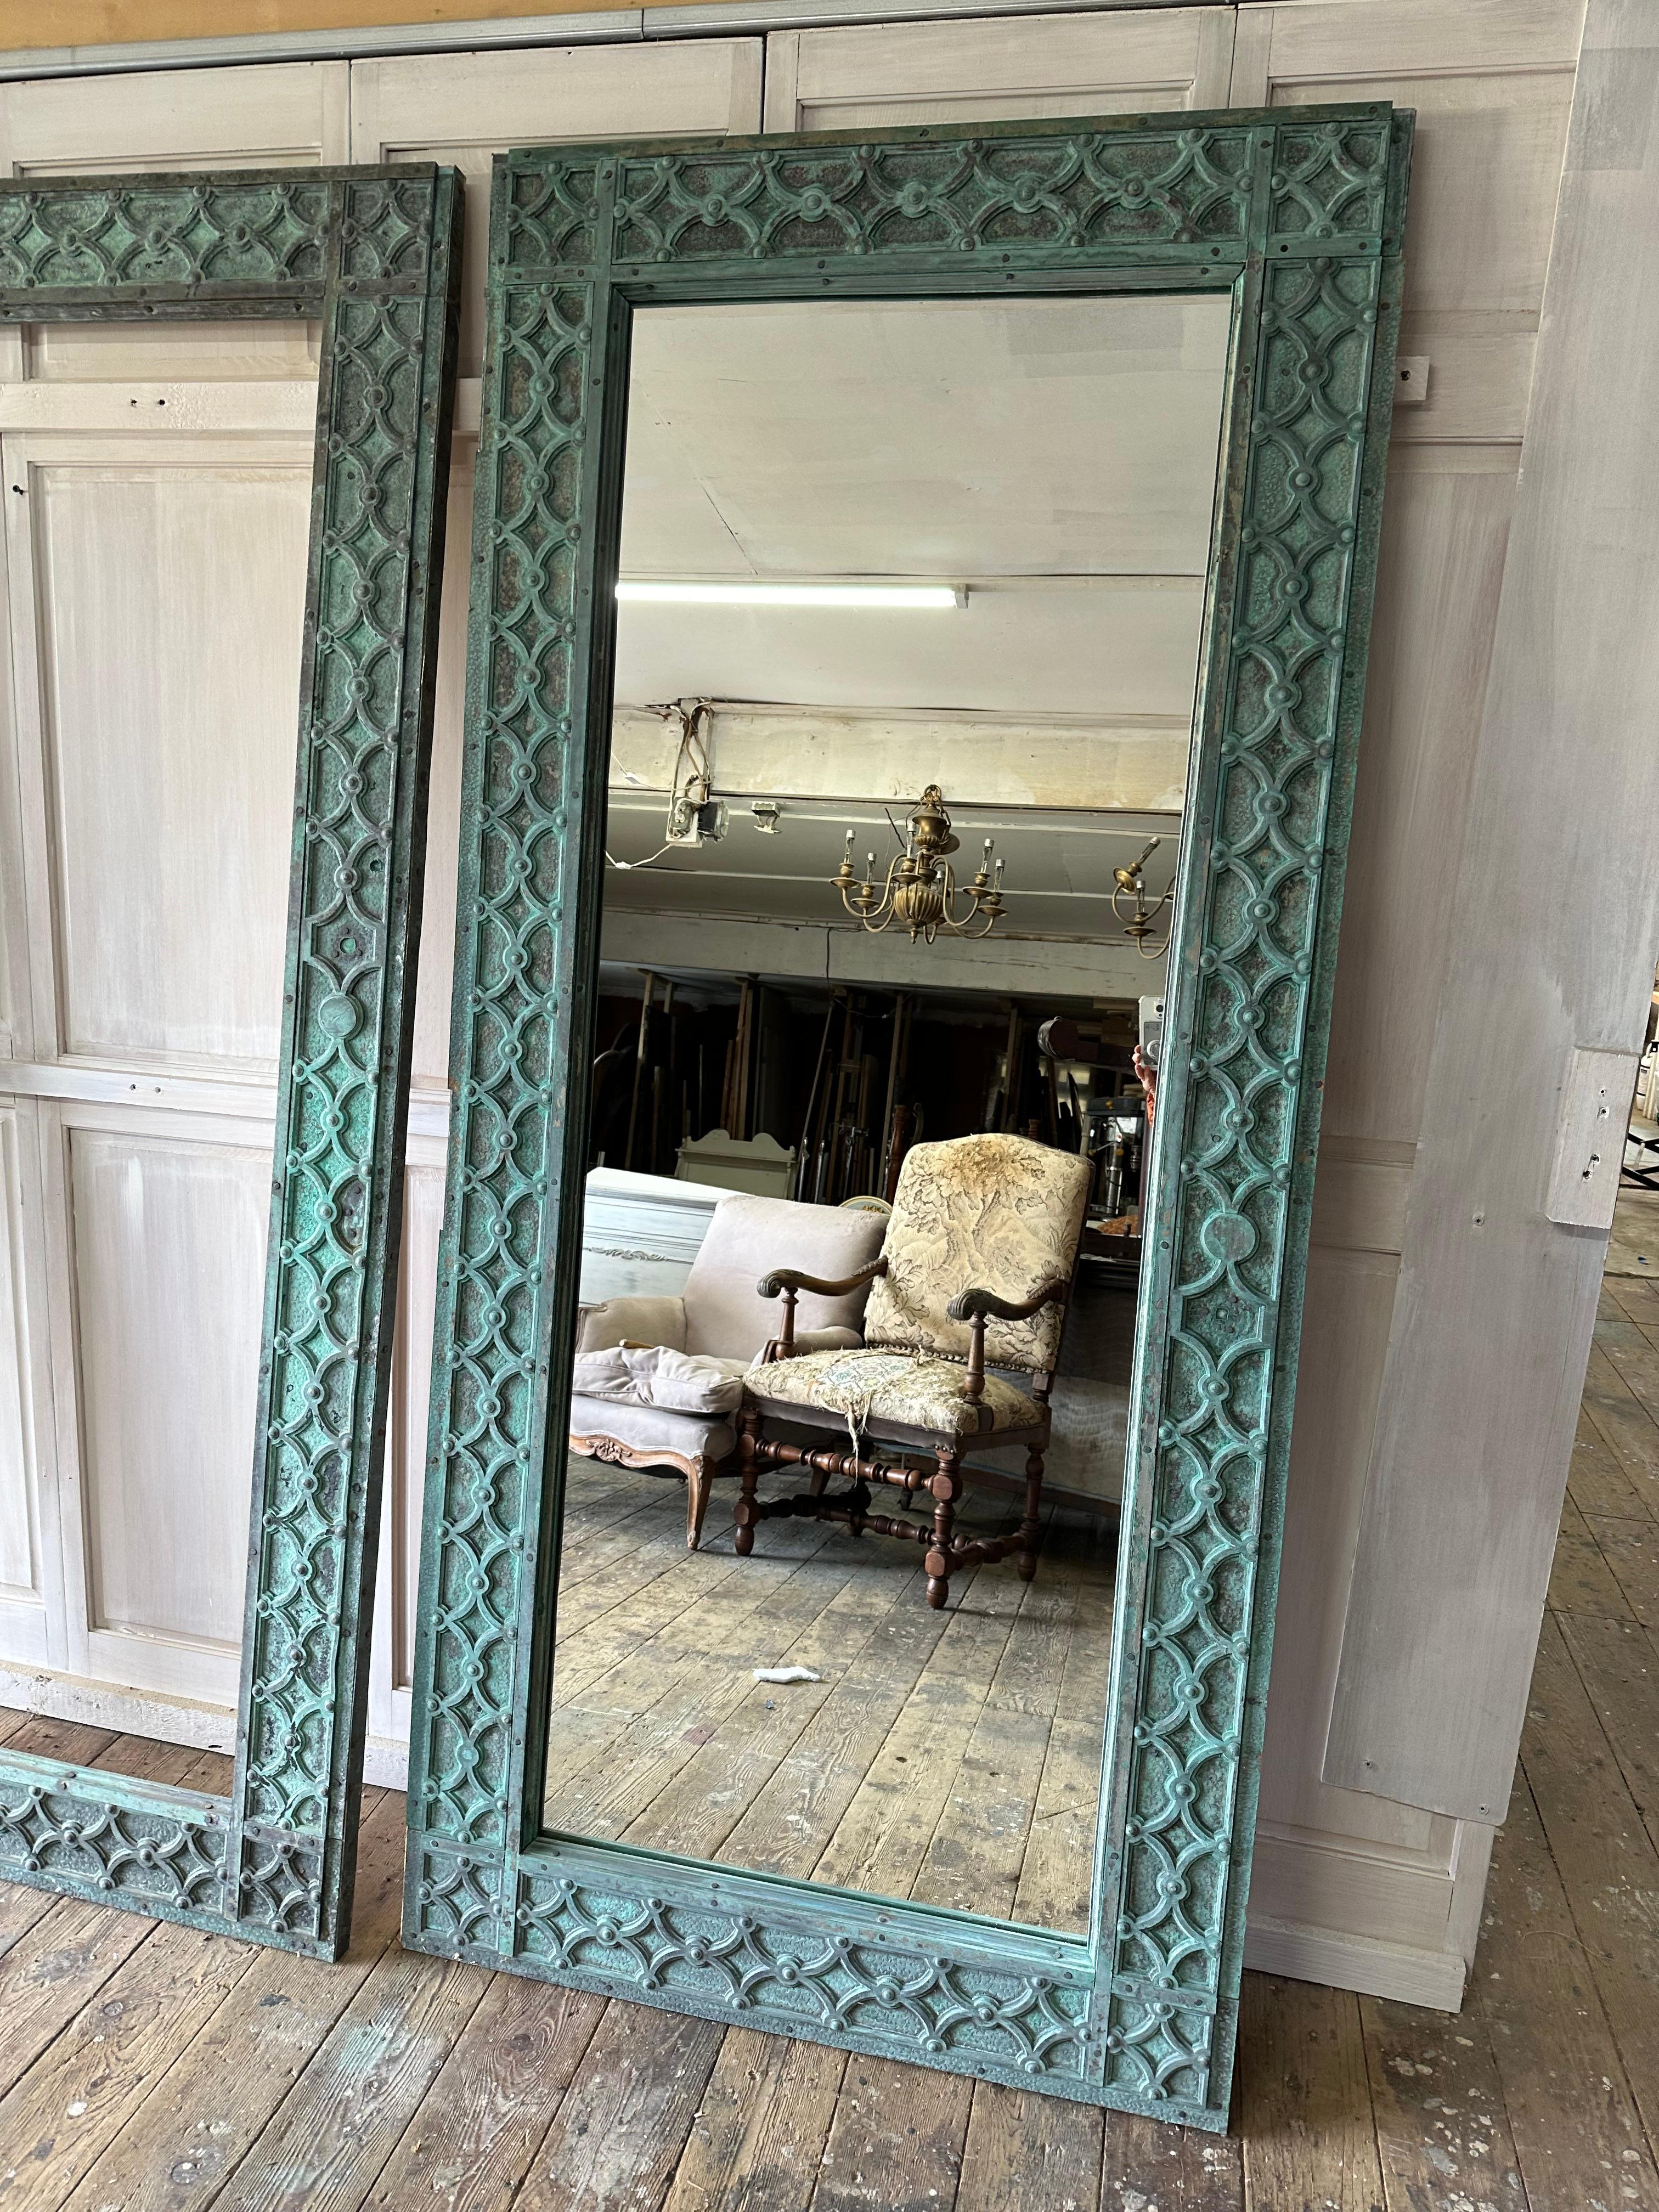 A very special and rare antique French bronze floor, wall mirrors with beautiful green verdigris. The detailed geometric low relief fretwork decorated mirrors were once antique doors that have been lovingly restored, reworked and made into mirror